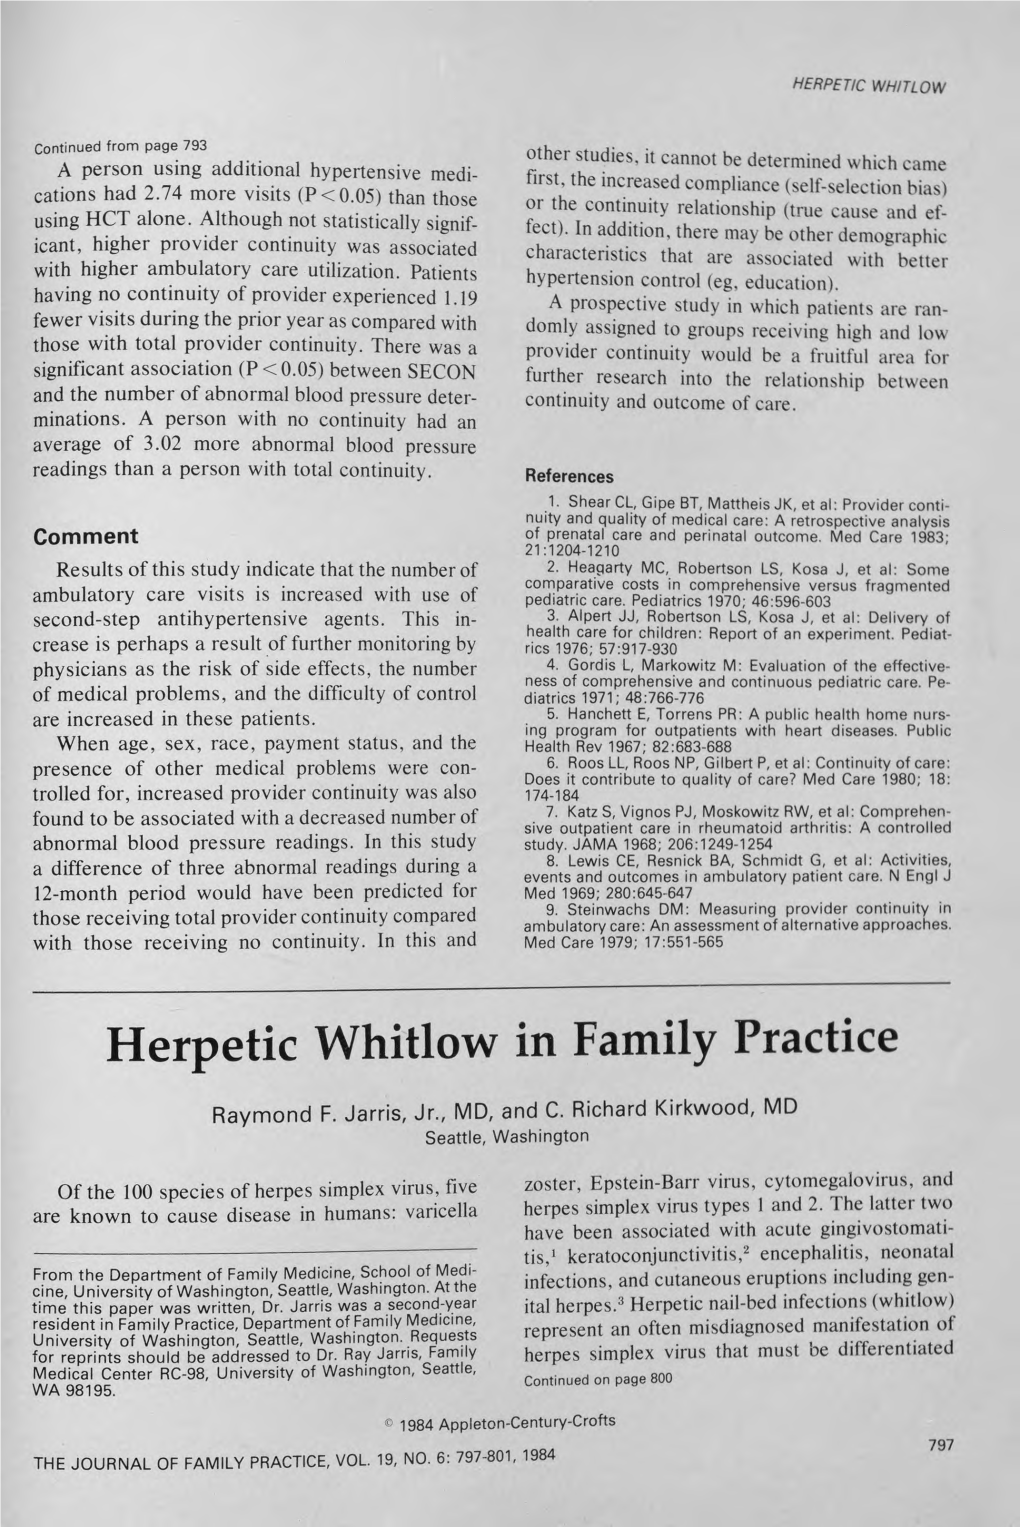 Herpetic Whitlow in Family Practice